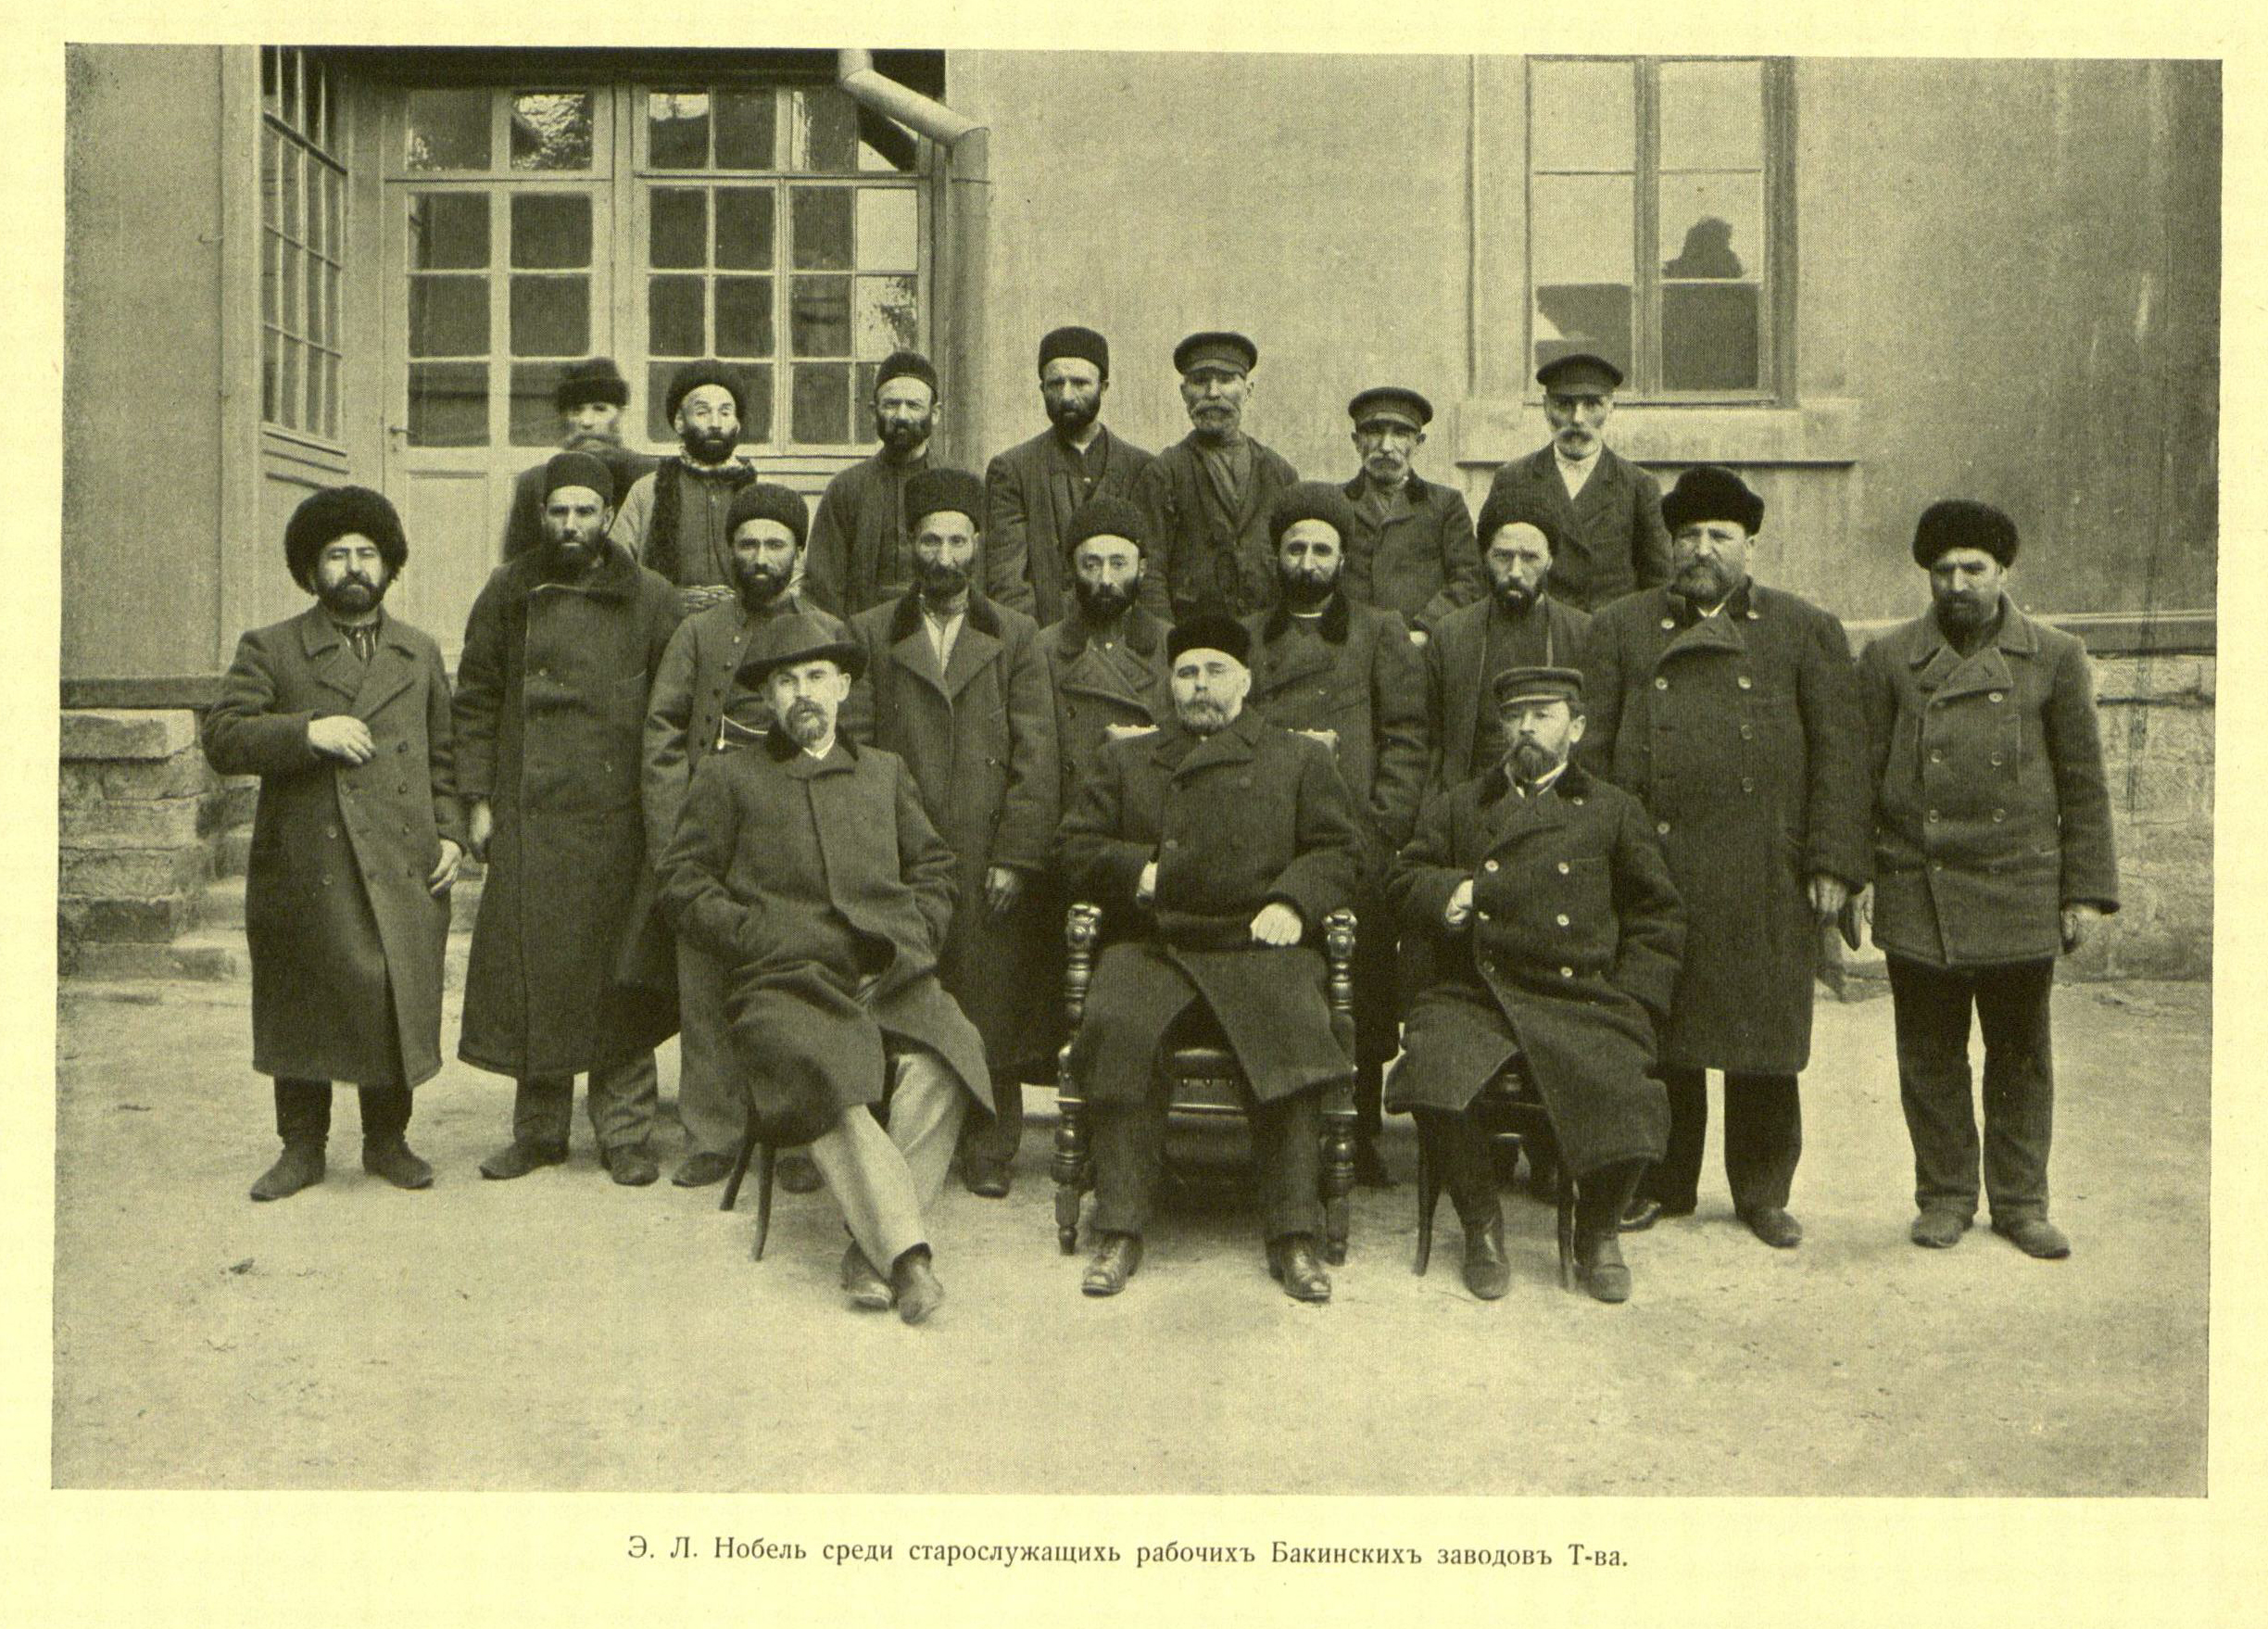 Emanuel Nobel sitting in the centre on the chair, surrounded by the old officials at the Baku office of Branobel.